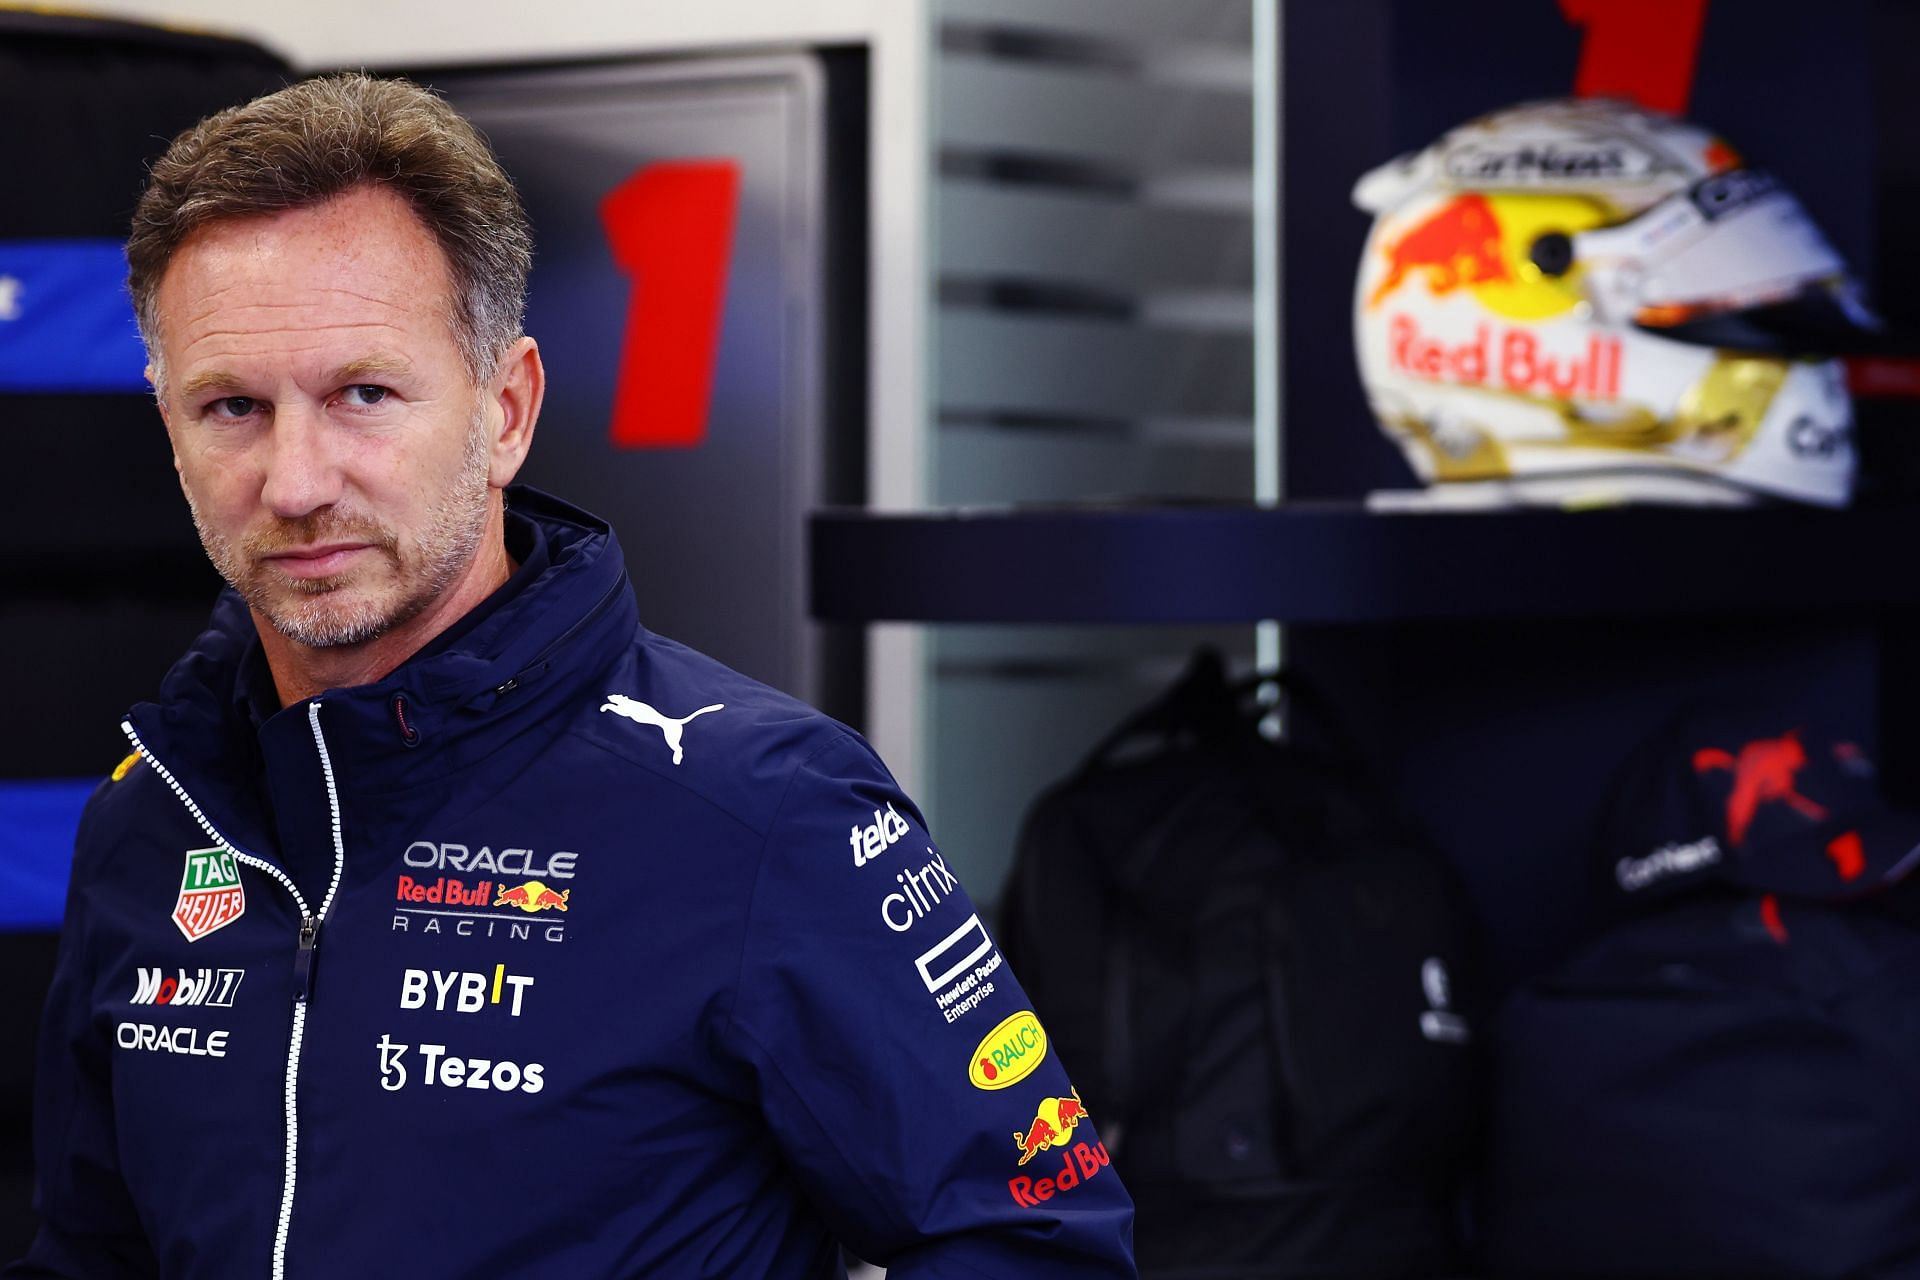 F1 Red Bull Racing Team Principal Christian Horner looks on in the garage ahead of the F1 Grand Prix of Hungary at Hungaroring on July 31, 2022 in Budapest, Hungary. (Photo by Mark Thompson/Getty Images) Prix of Hungary